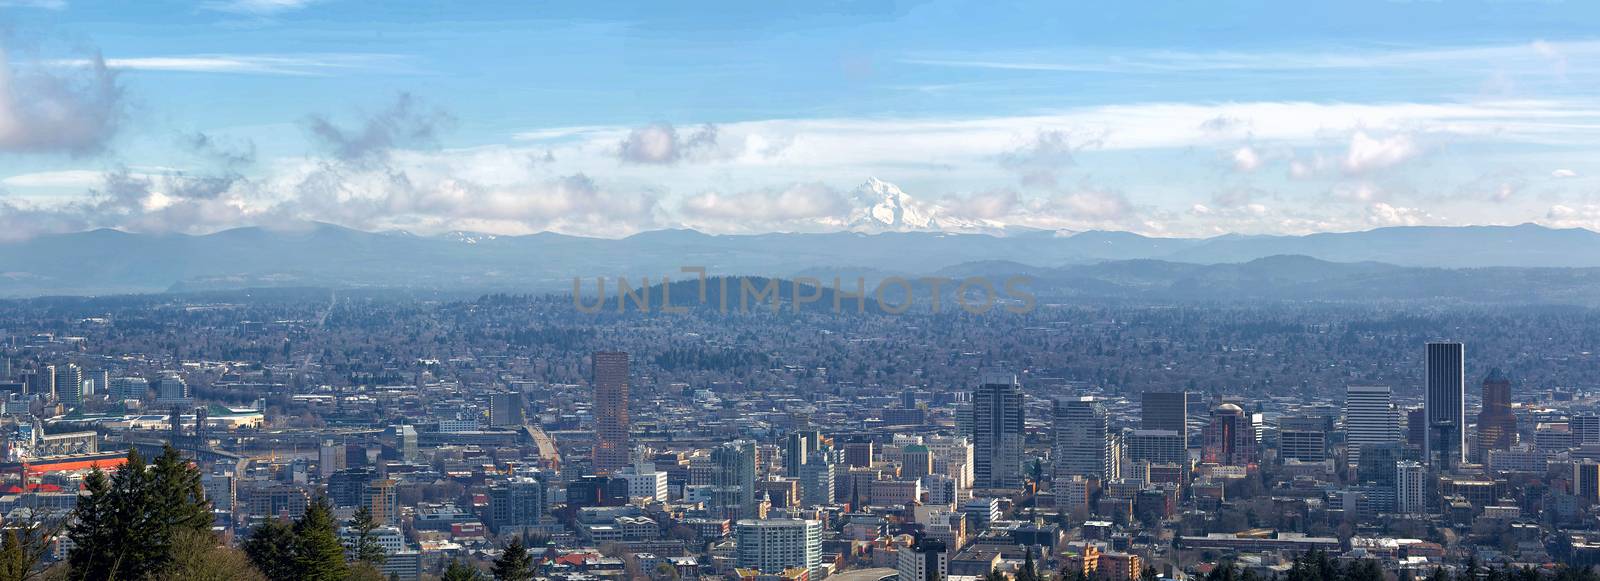 Portland Cityscape with Mt Hood Daytime View Panorama by jpldesigns